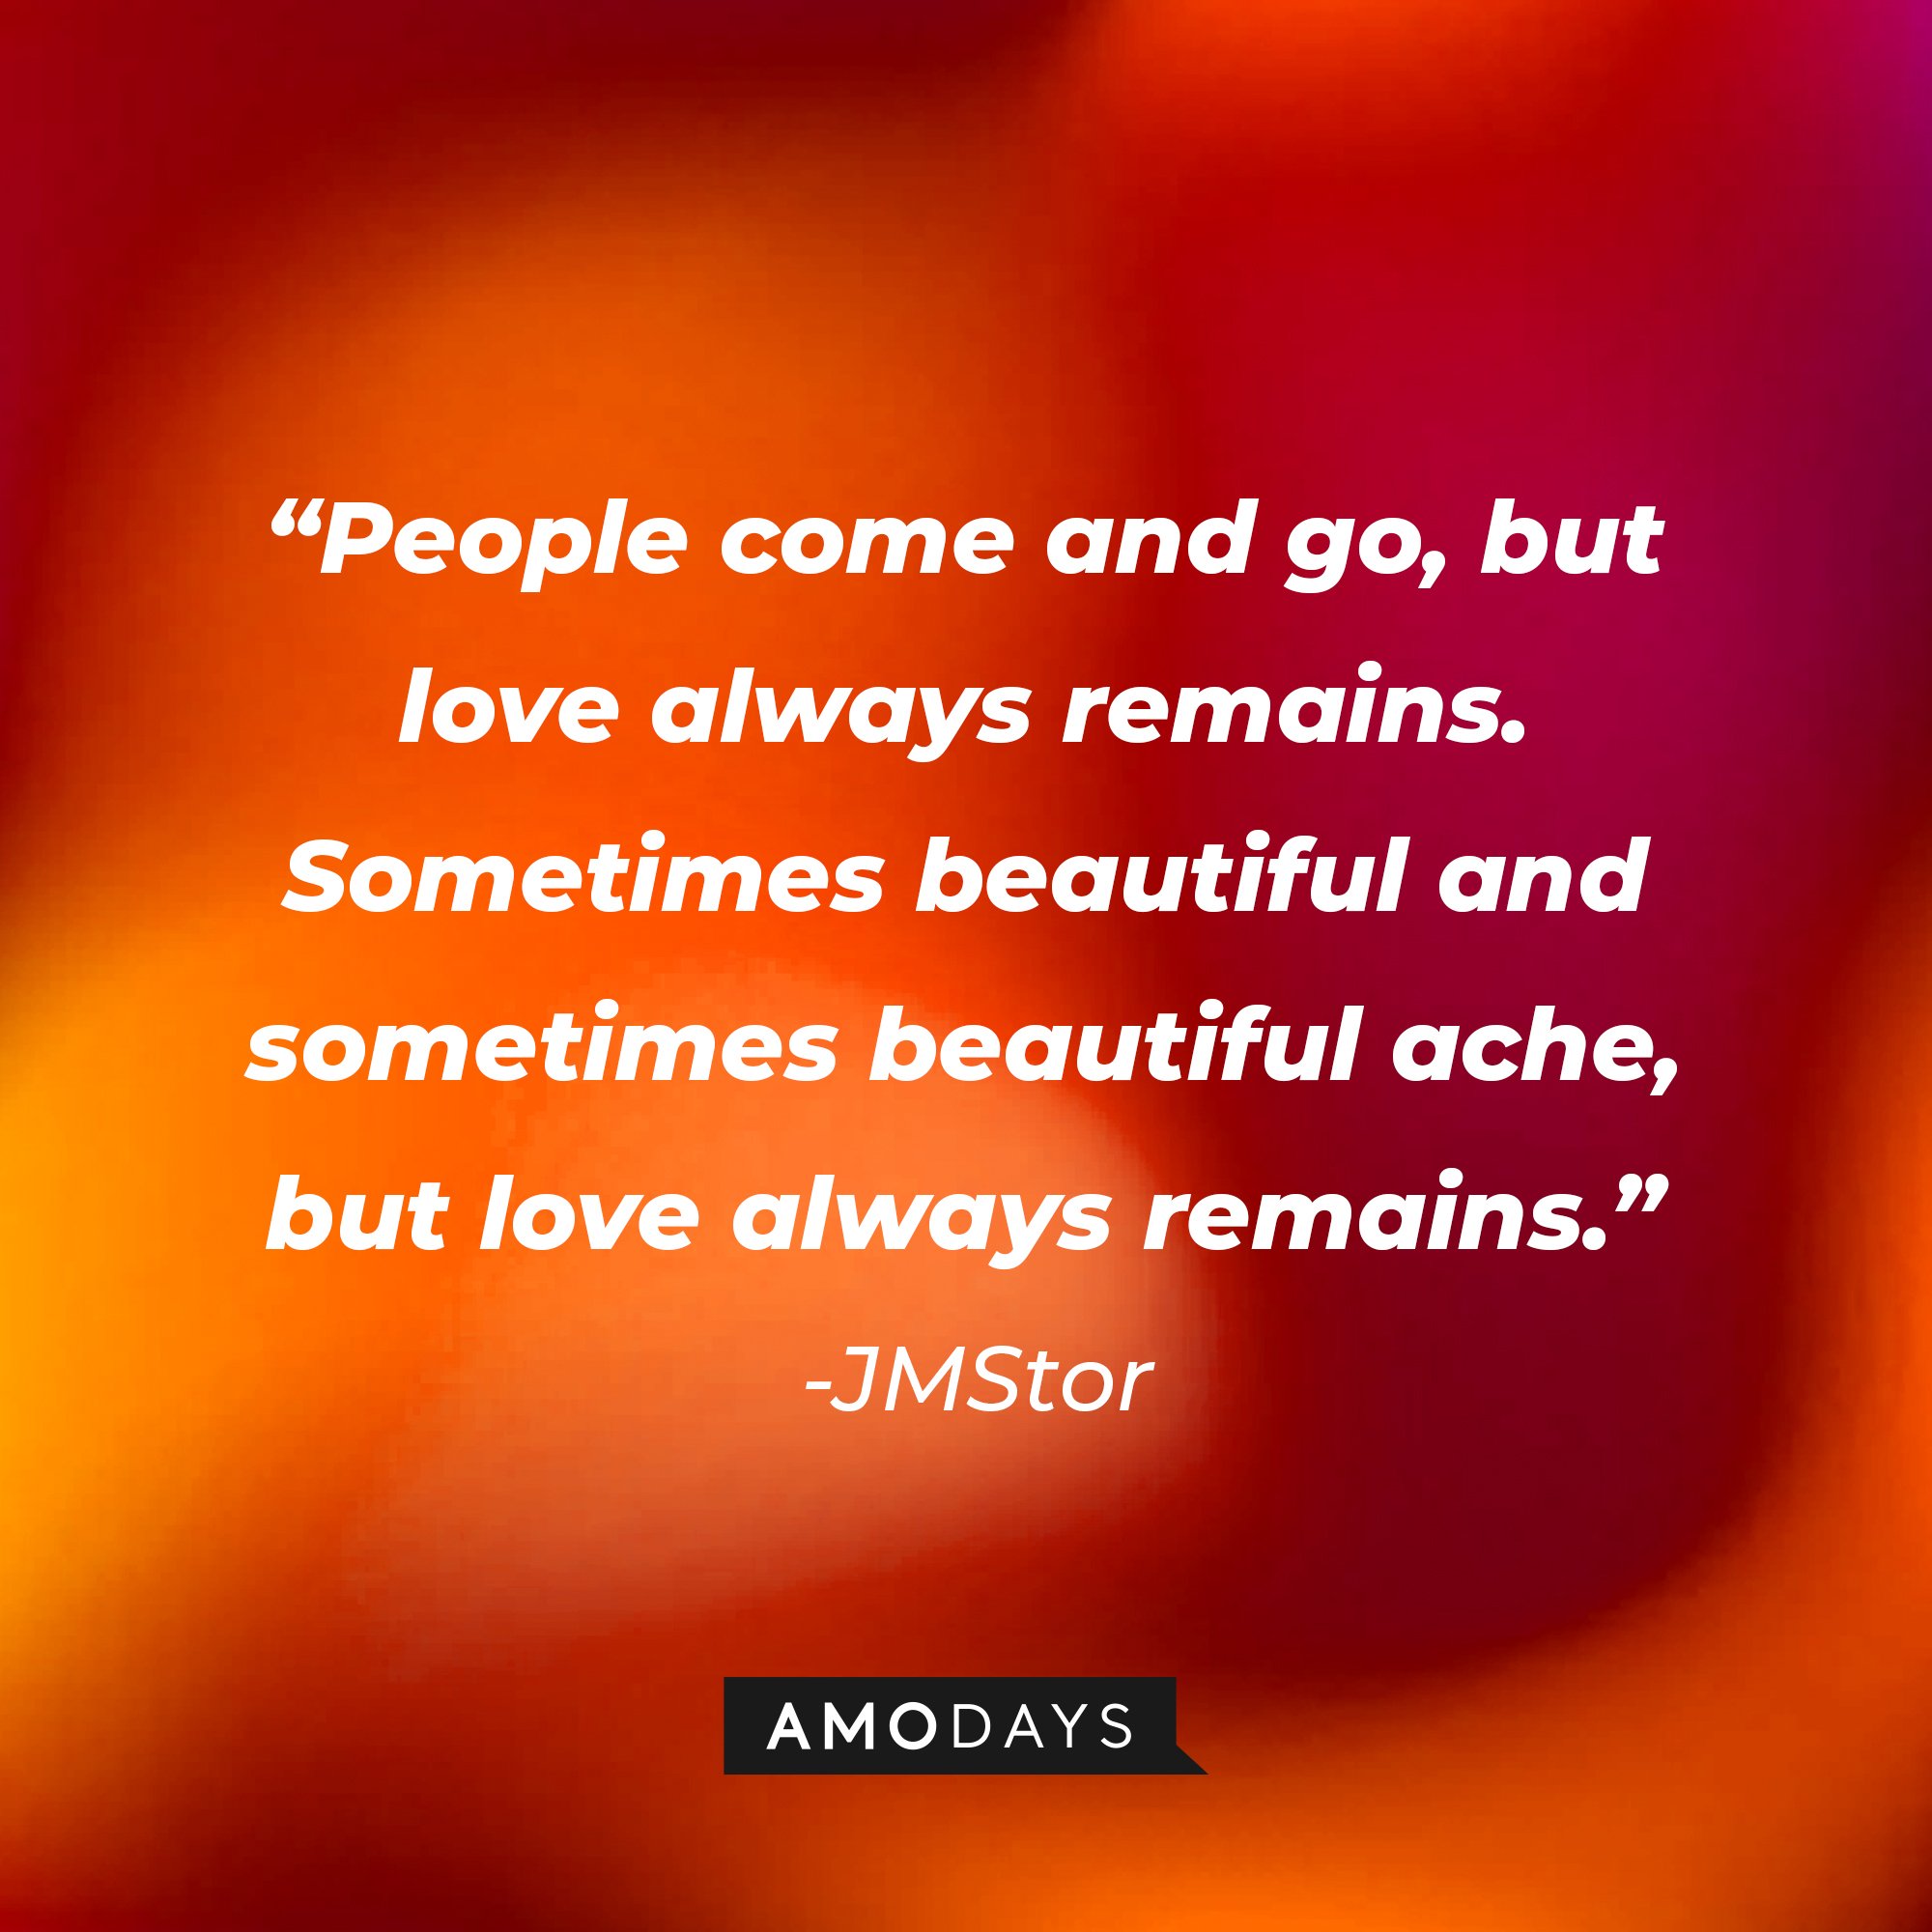 JMStor’s quote: "People come and go, but love always remains. Sometimes beautiful and sometimes beautiful ache, but love always remains." | Image: AmoDays